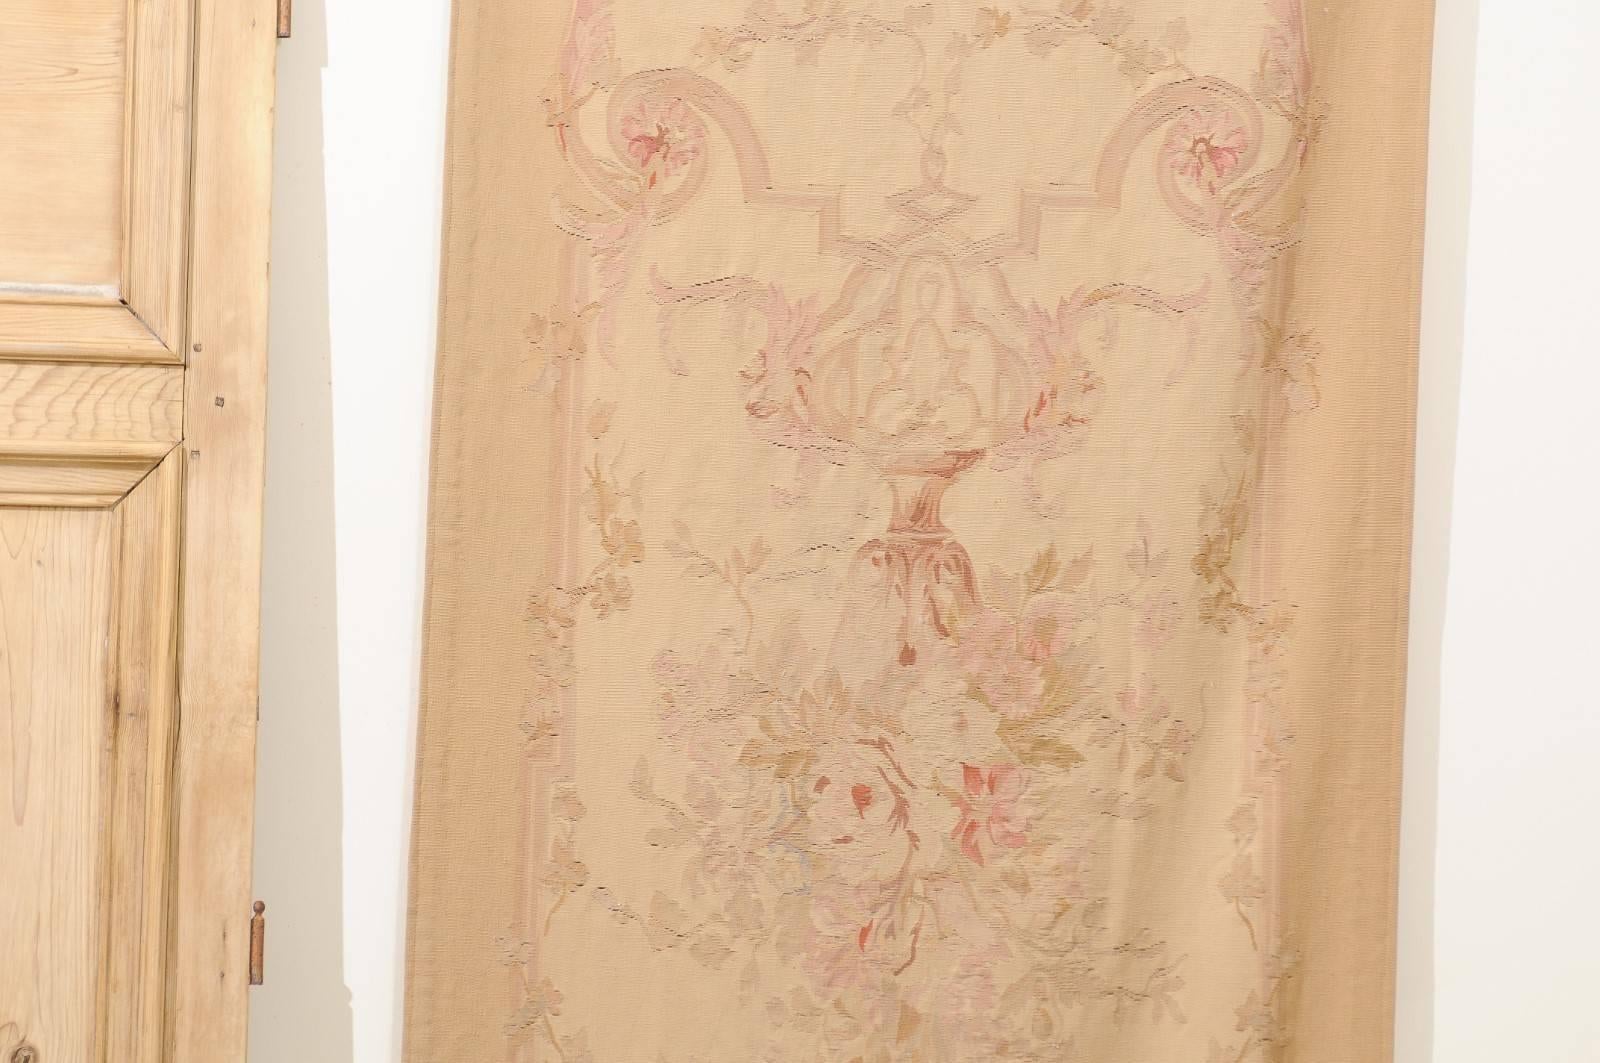 French 19th Century Vertical Hand-Woven Tapestry with Floral Décor and Volutes For Sale 1